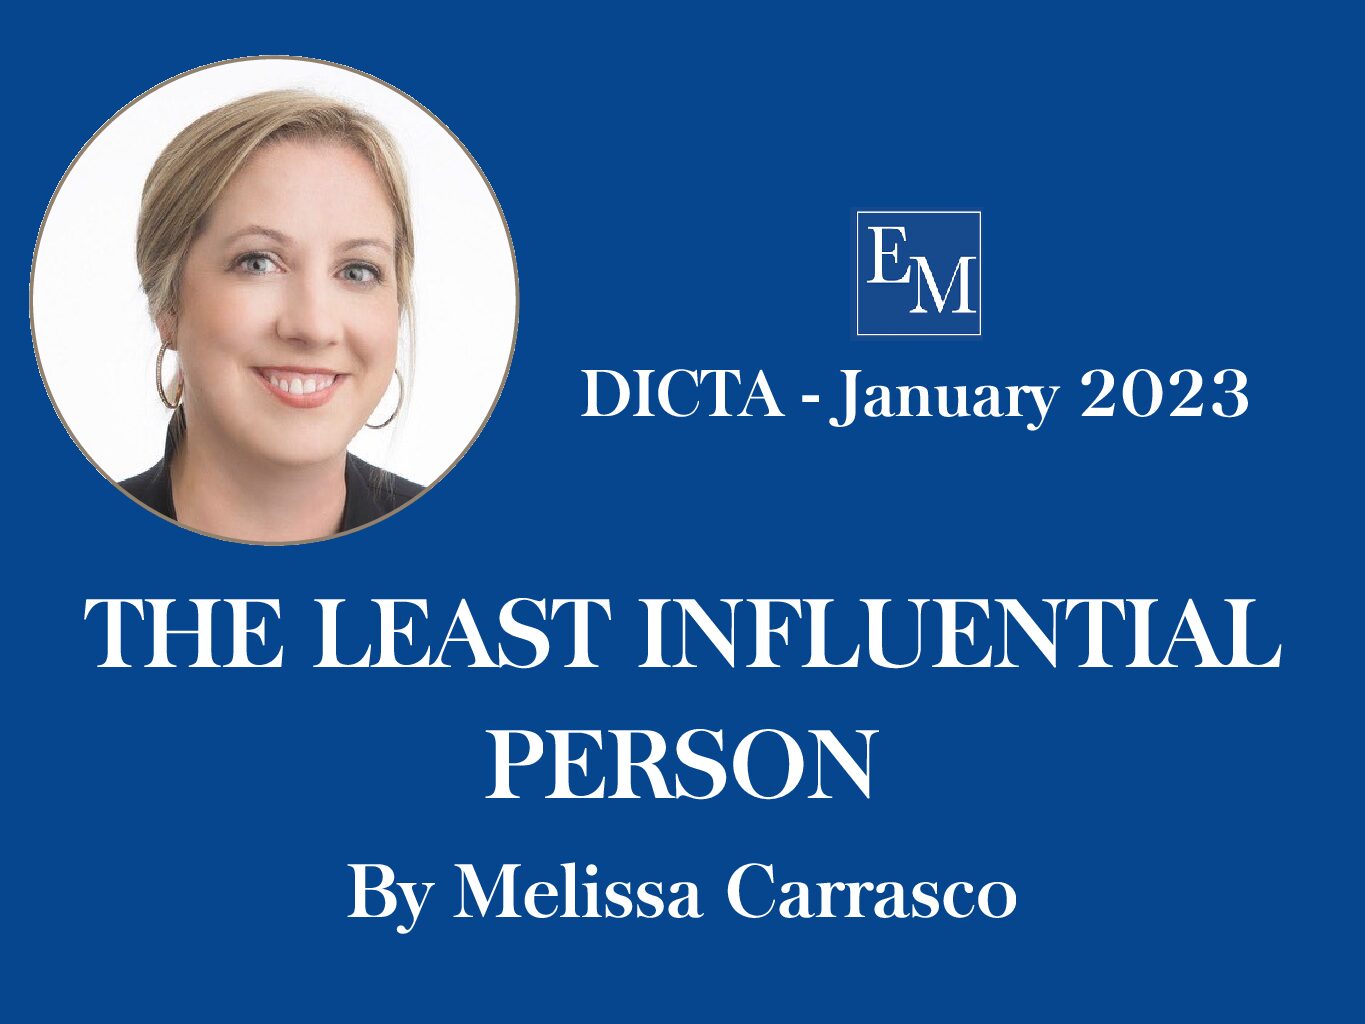 January DICTA Publication: THE LEAST INFLUENTIAL PERSON by Melissa Carrasco